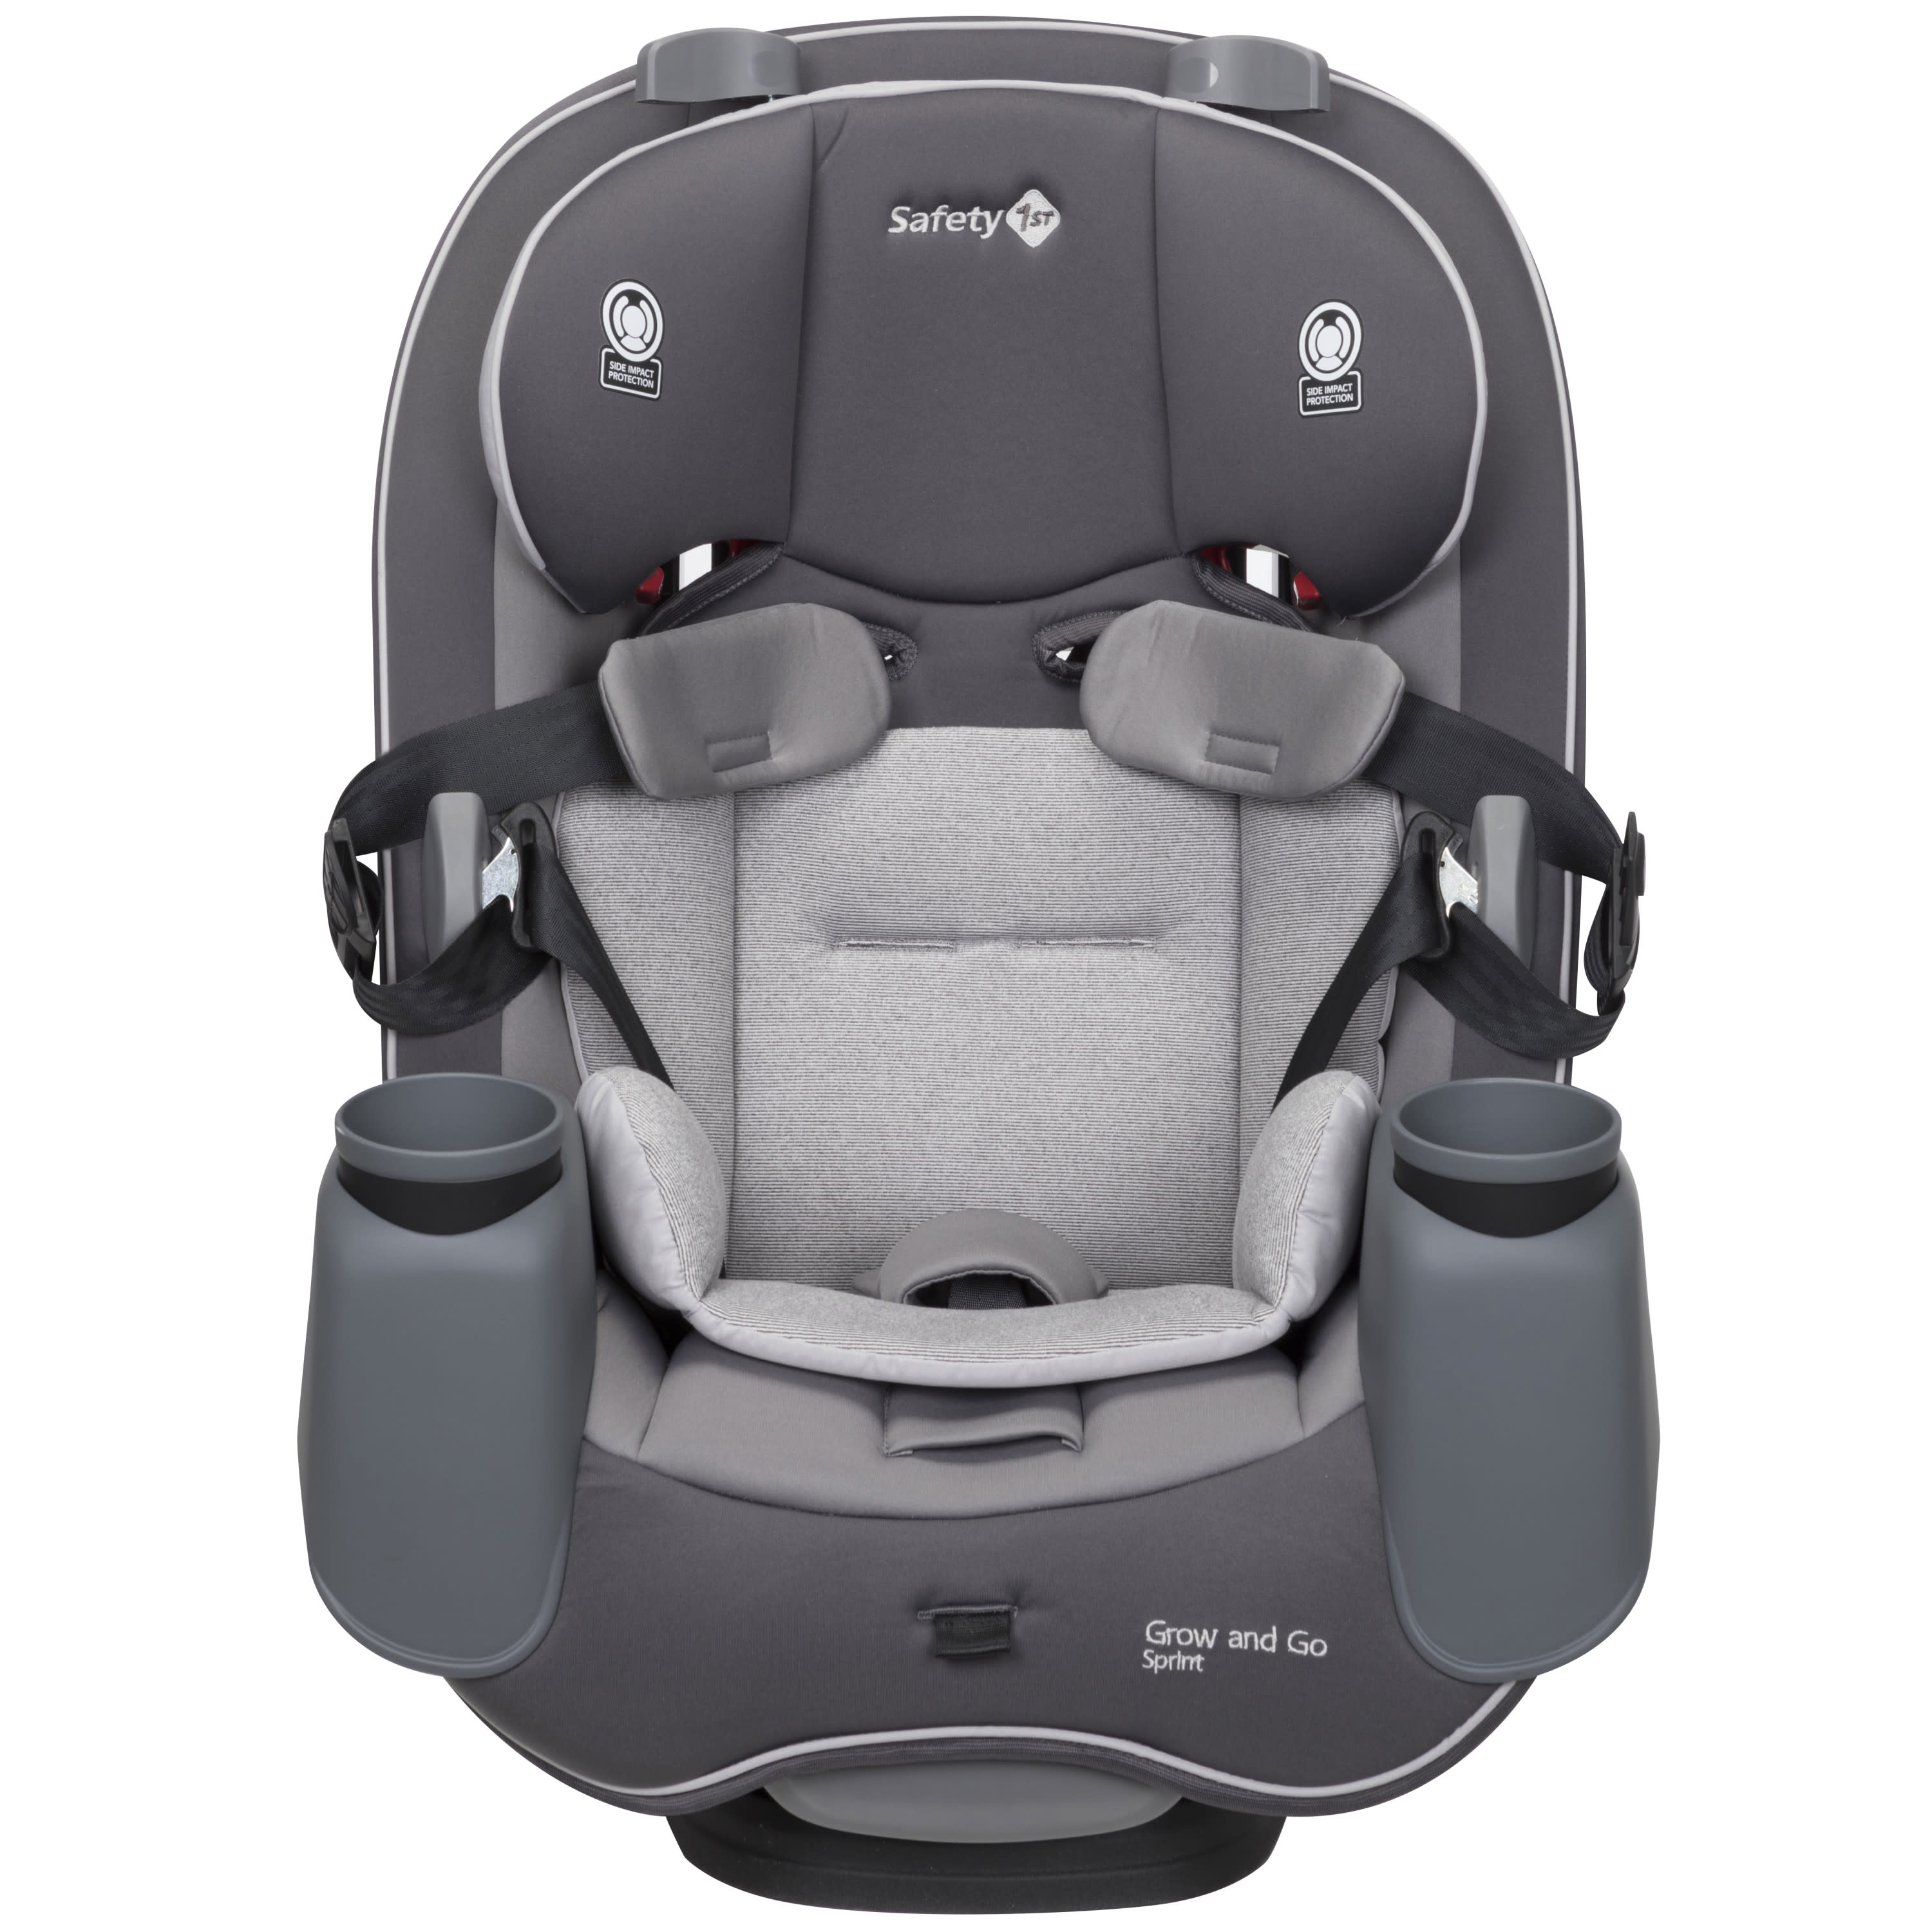 Safety 1st Grow and Go Sprint All-in-1 Convertible Car Seat, Silver Lake - image 4 of 26